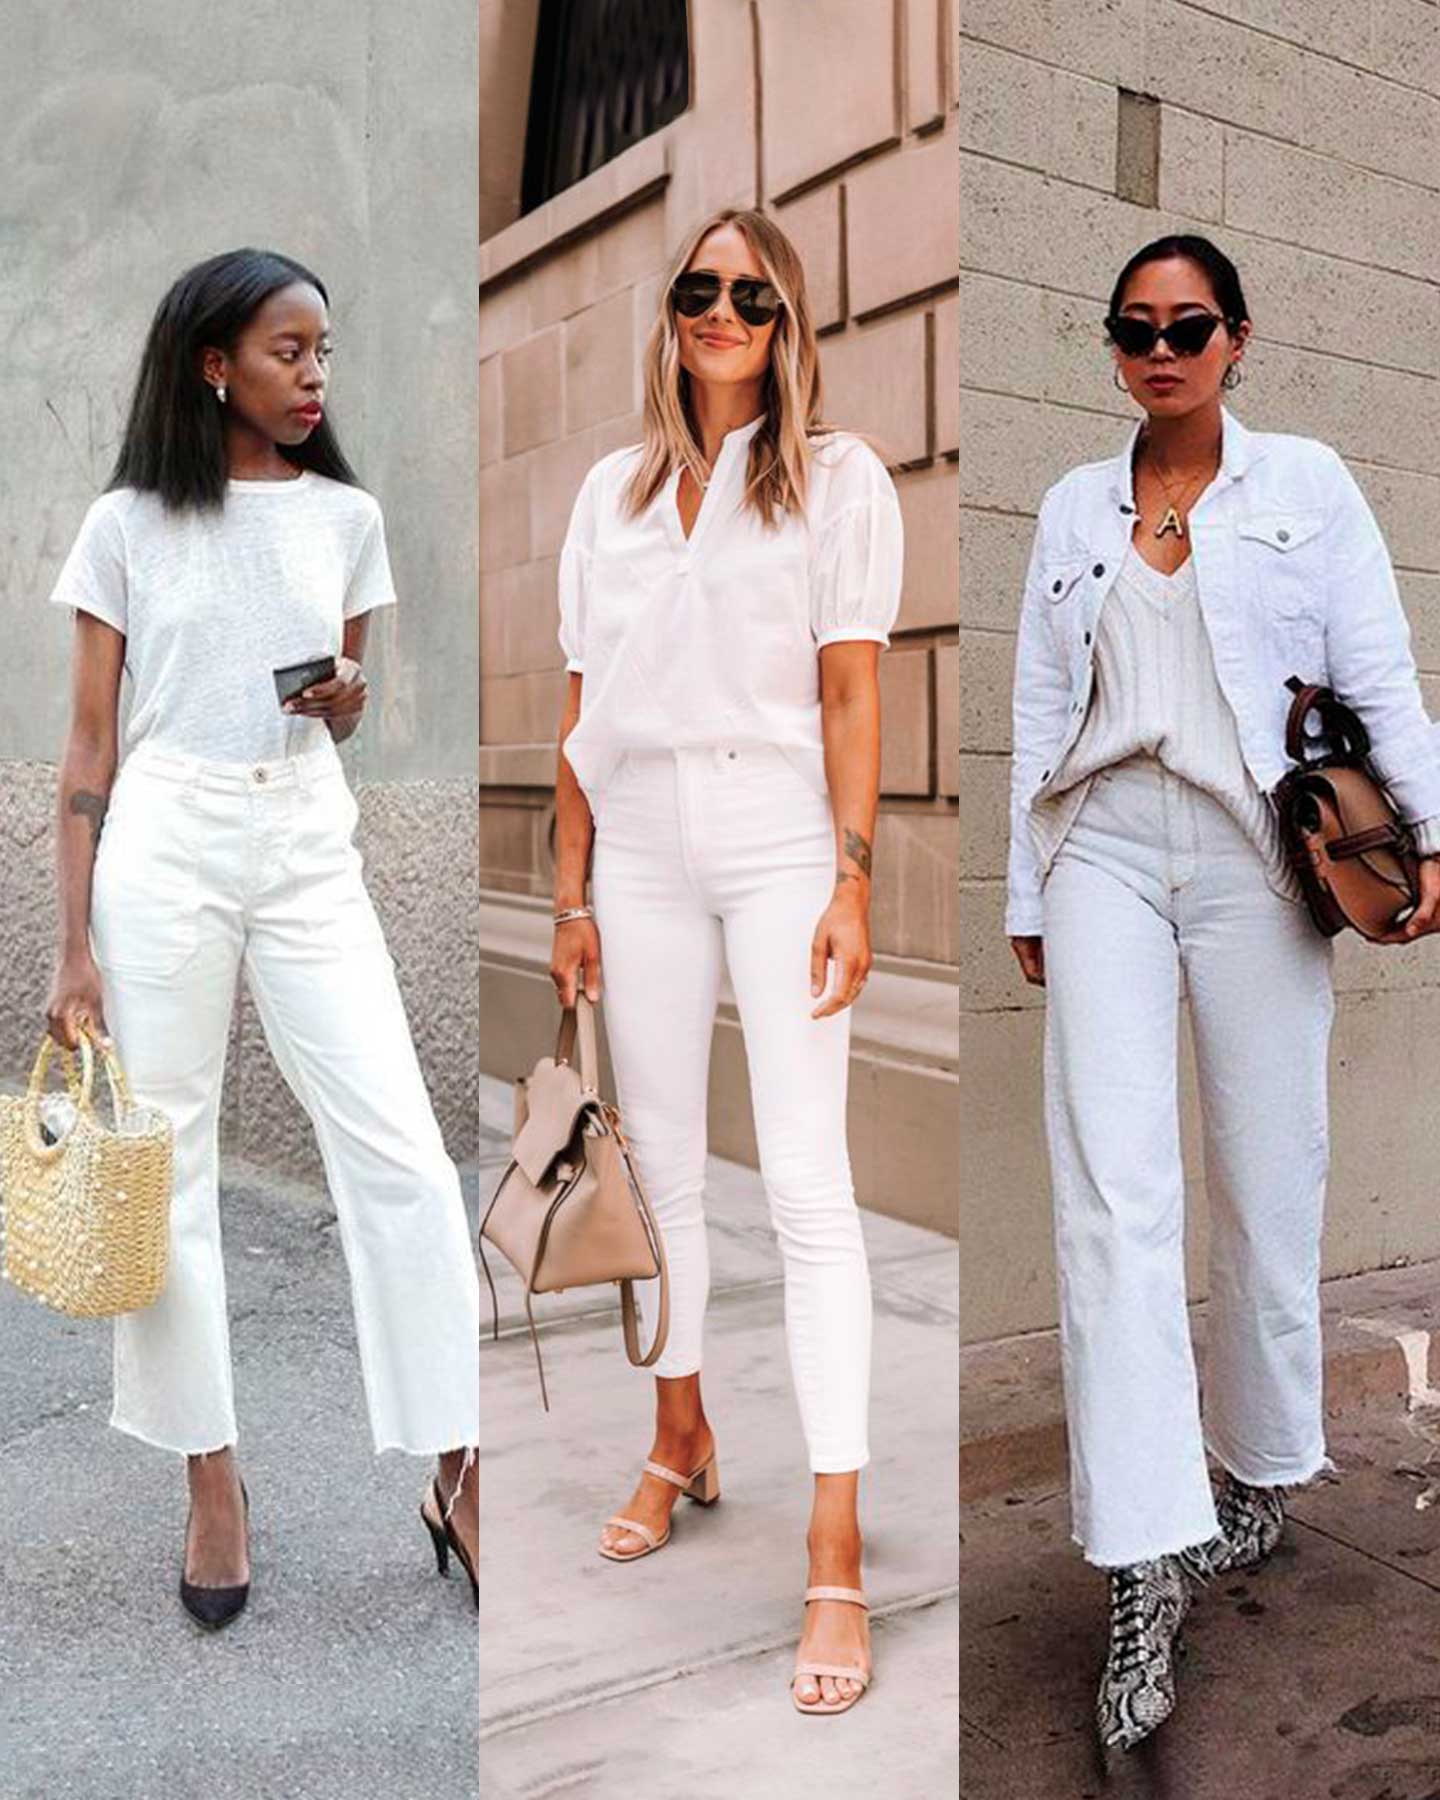 White Jeans In Winter. What Do You Think? - The Fashion Tag Blog